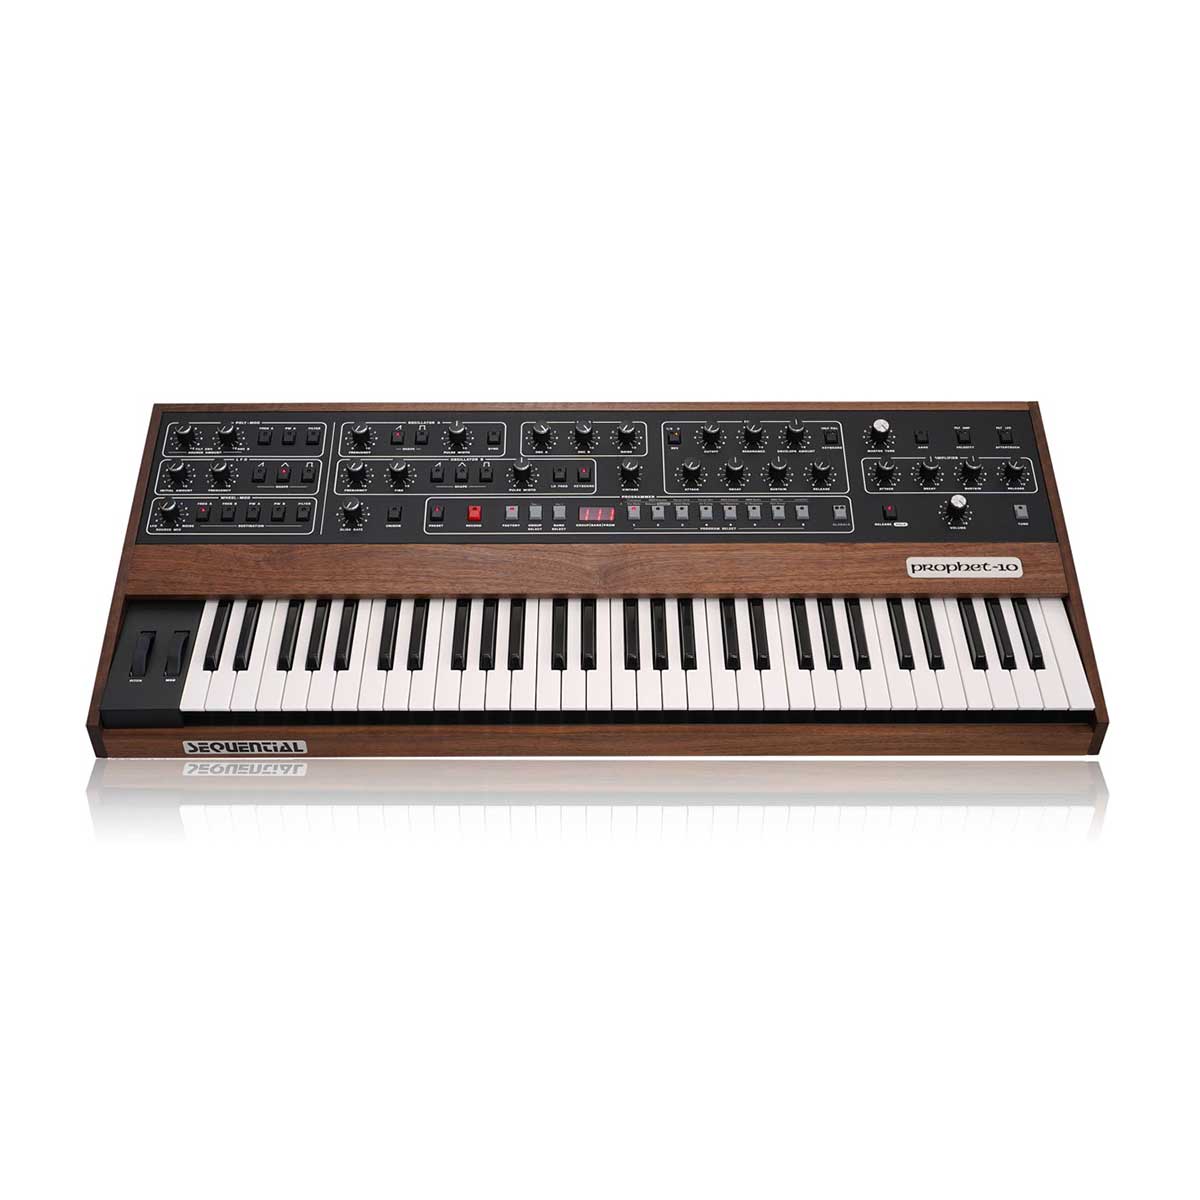 Sequential Prophet-10 Keyboard Legendary 10-voice Analog Poly Synth (Dave Smith Instruments)